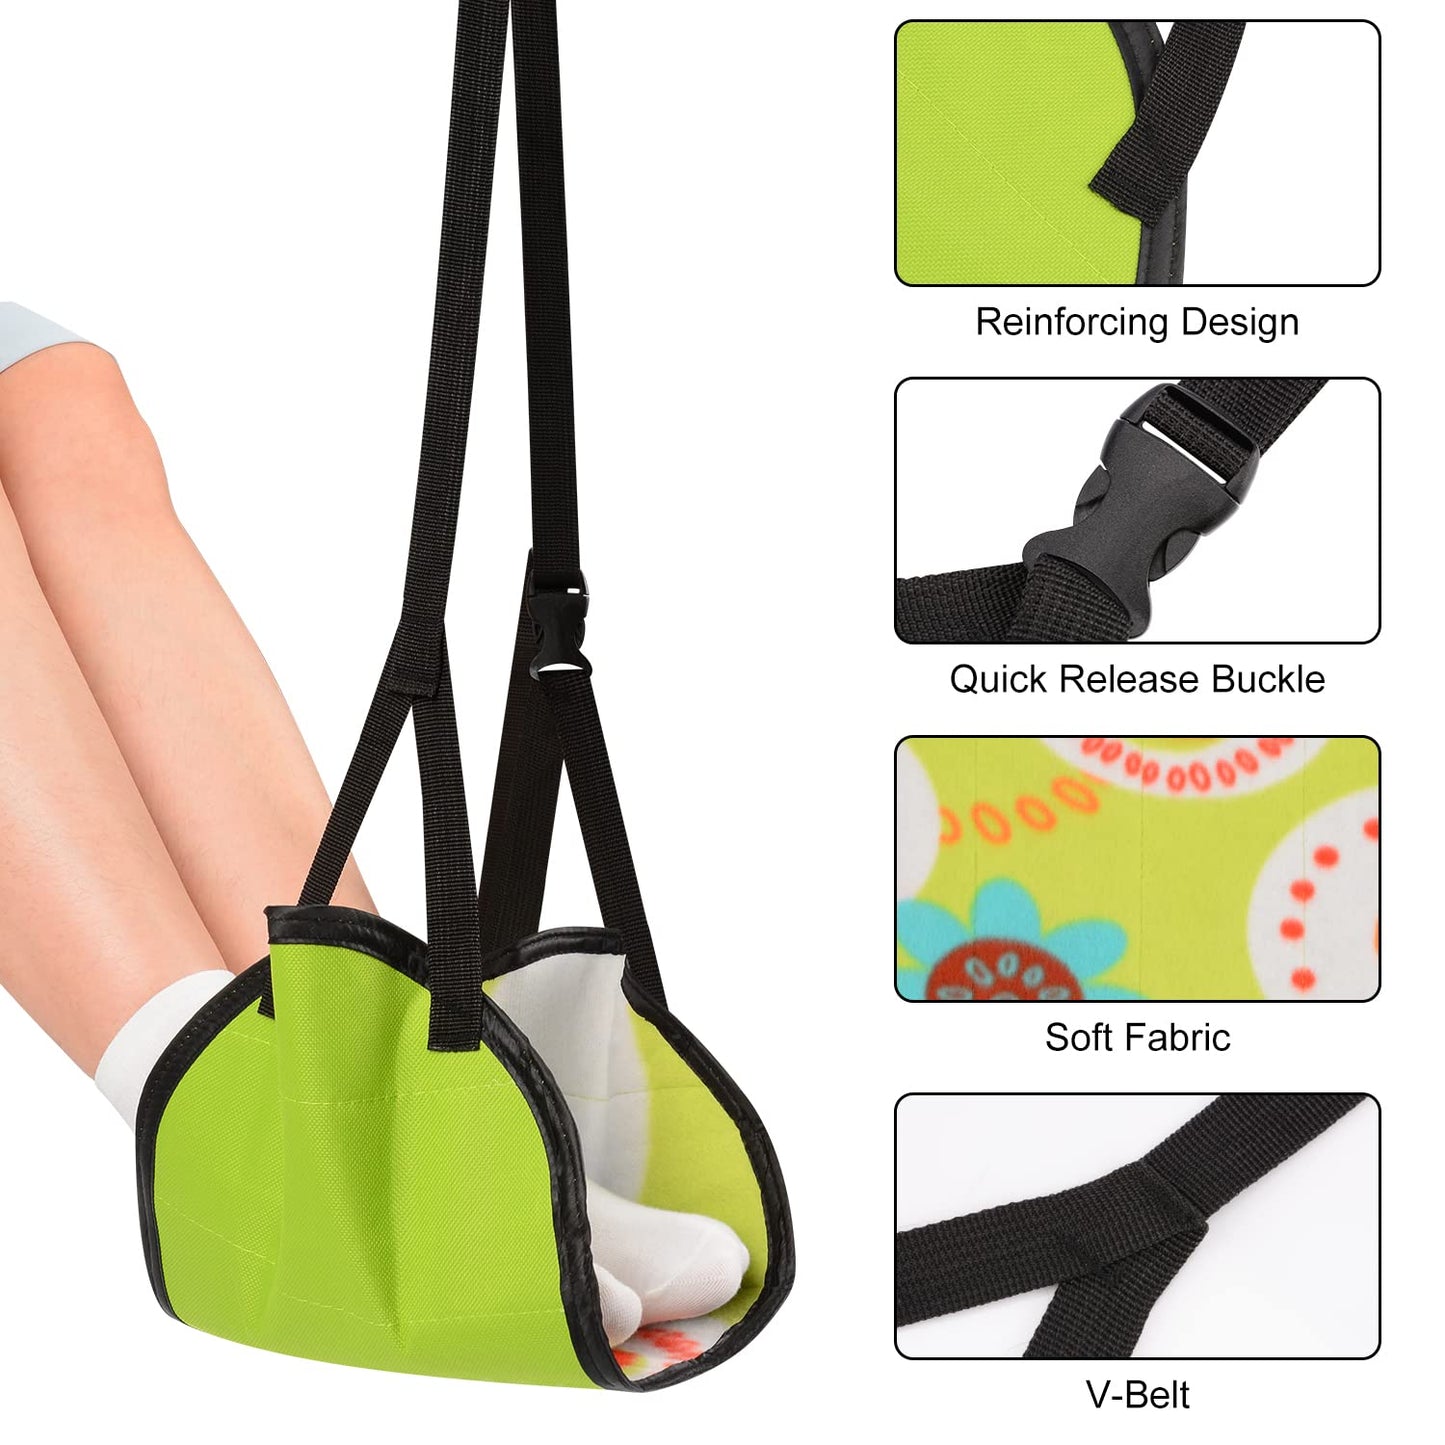 Aircraft footrest, airplane travel accessories foot hammock, adjustable  sling travel footrest, suitable for long-distance flights, providing  relaxation and comfort, portable airplane footrest, suitable for airplanes,  tracars, offices, under desks at